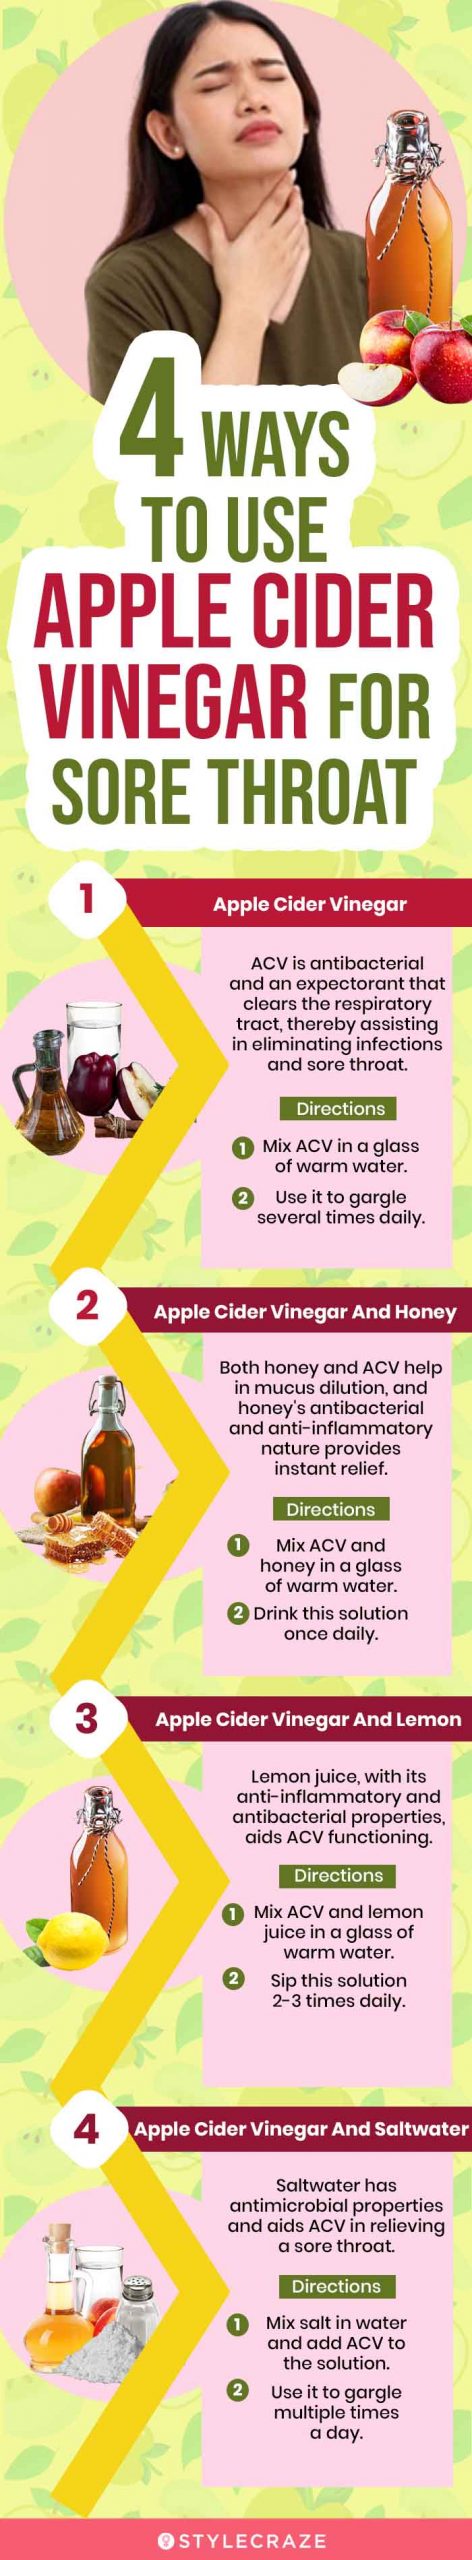 4 ways to use apple cider vinegar for sore throat [infographic]